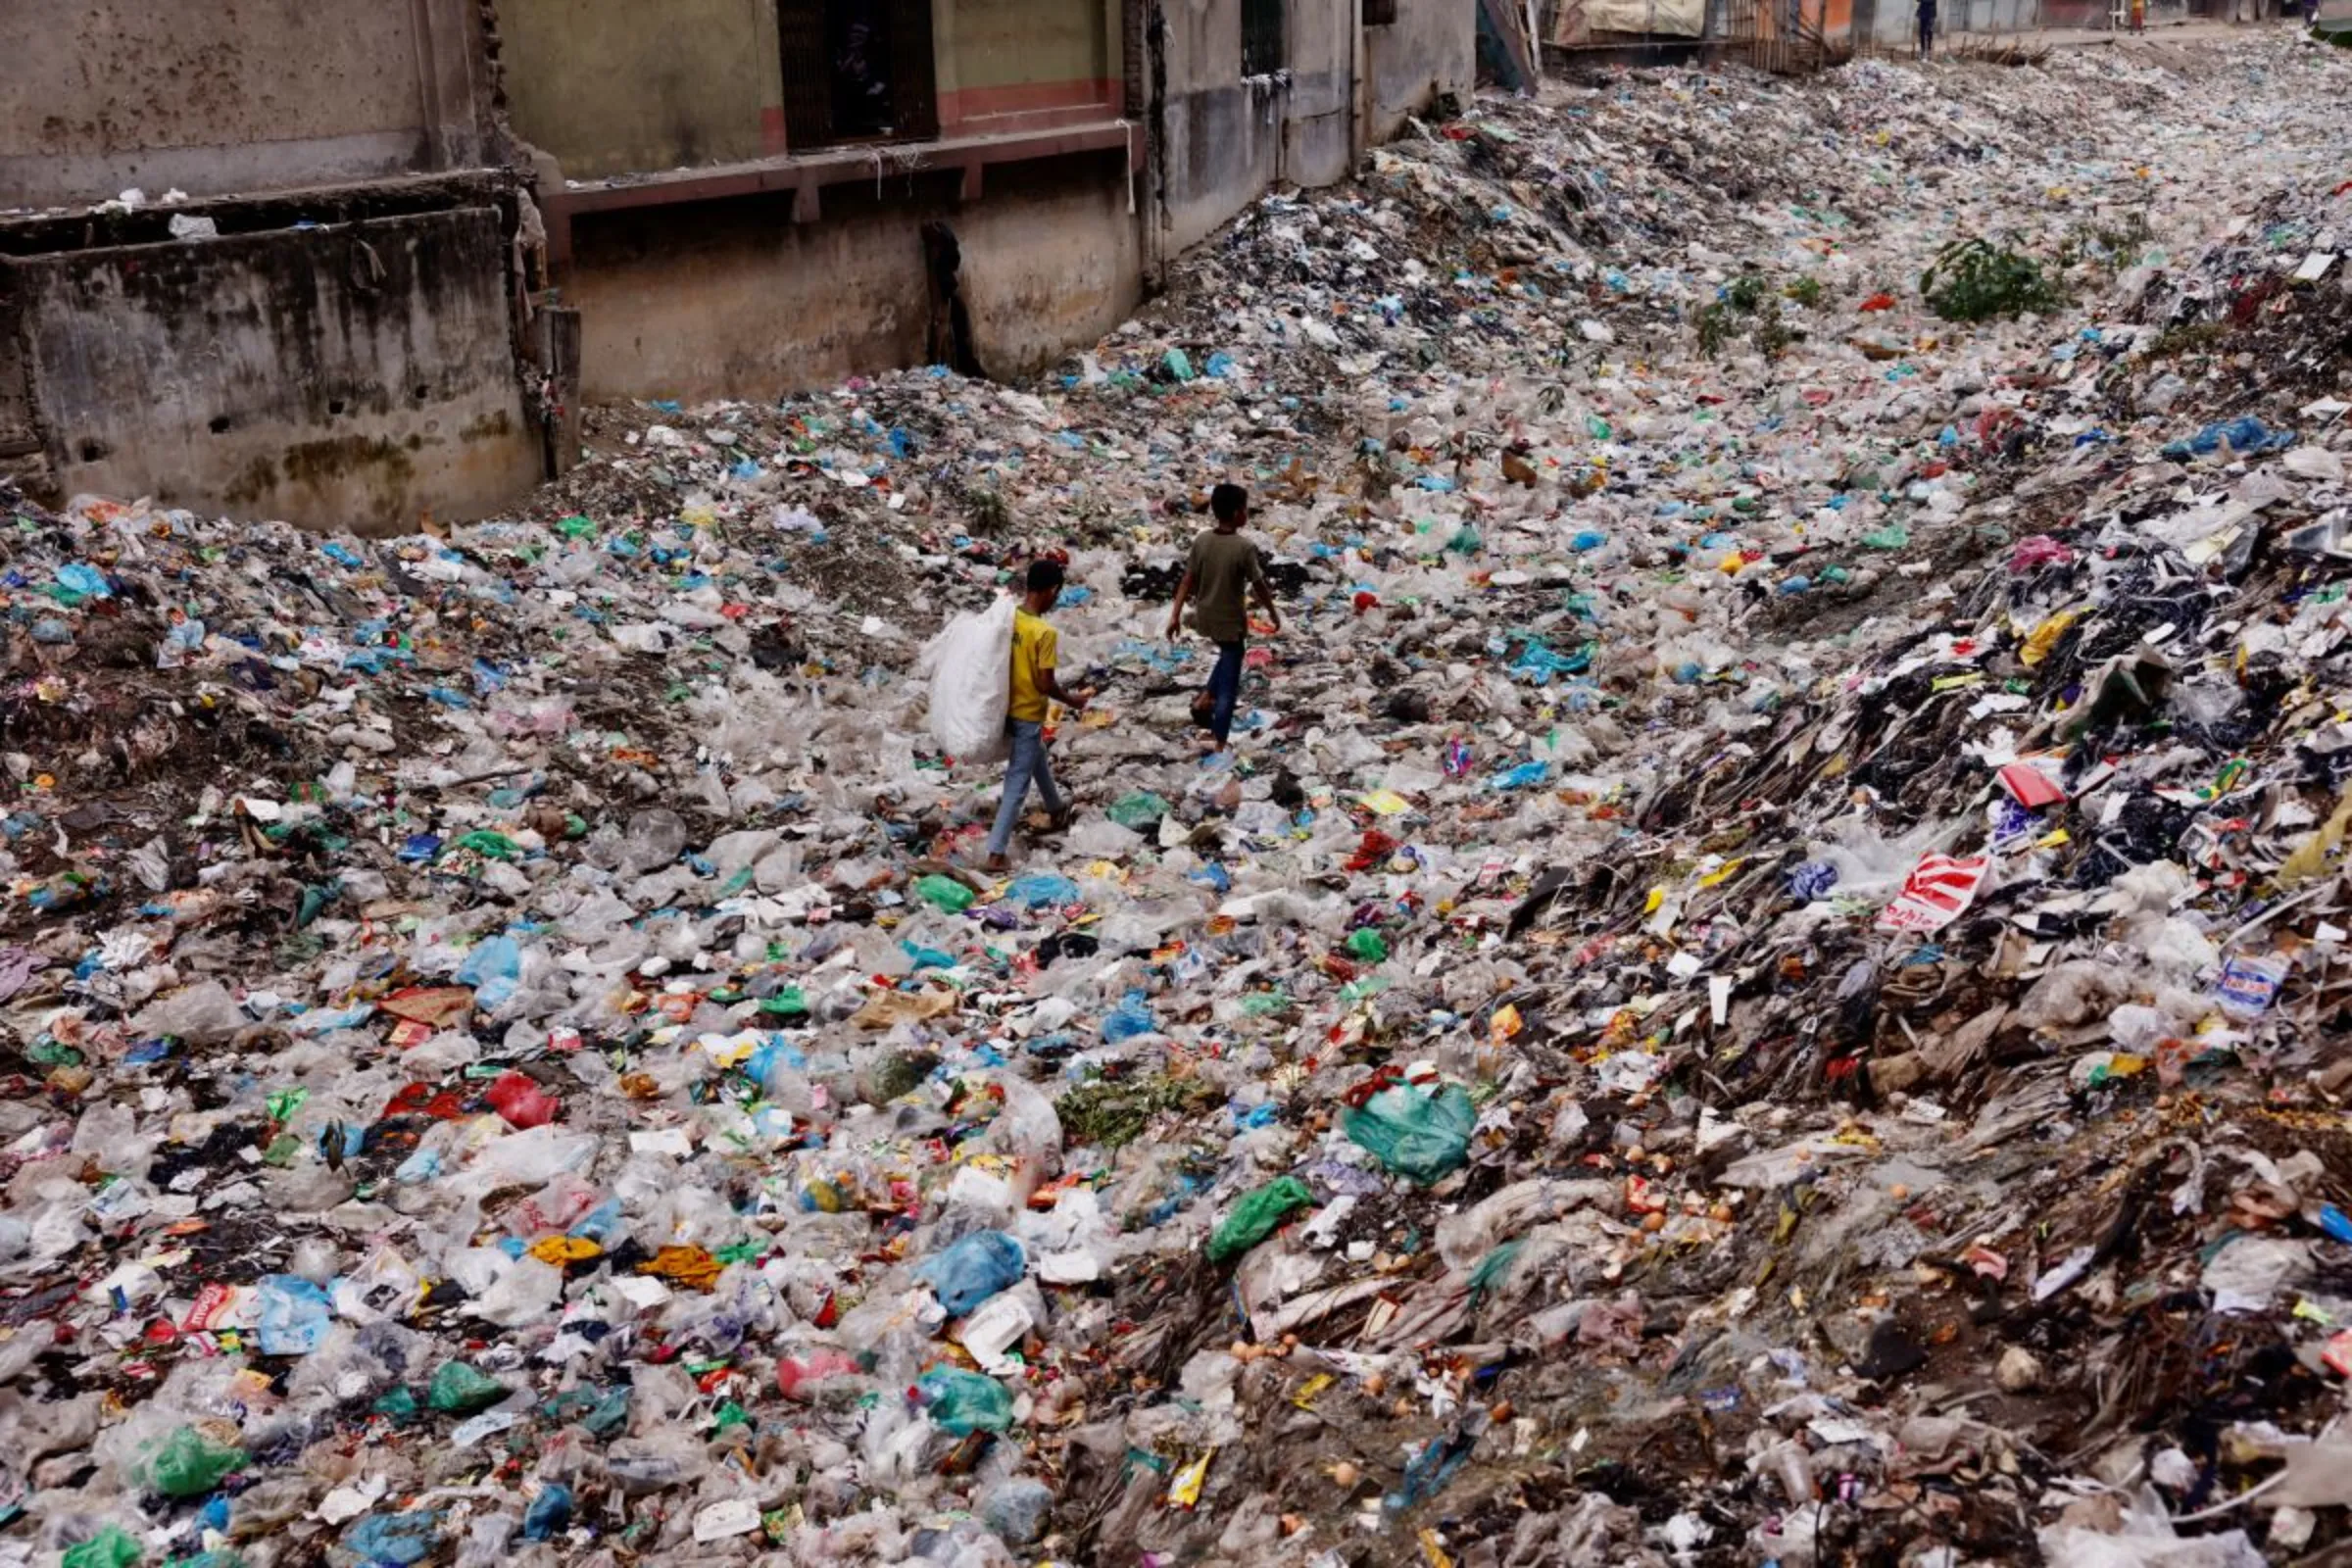 Children walk over a polluted area as they collect plastic materials in Dhaka, Bangladesh, January 24, 2022